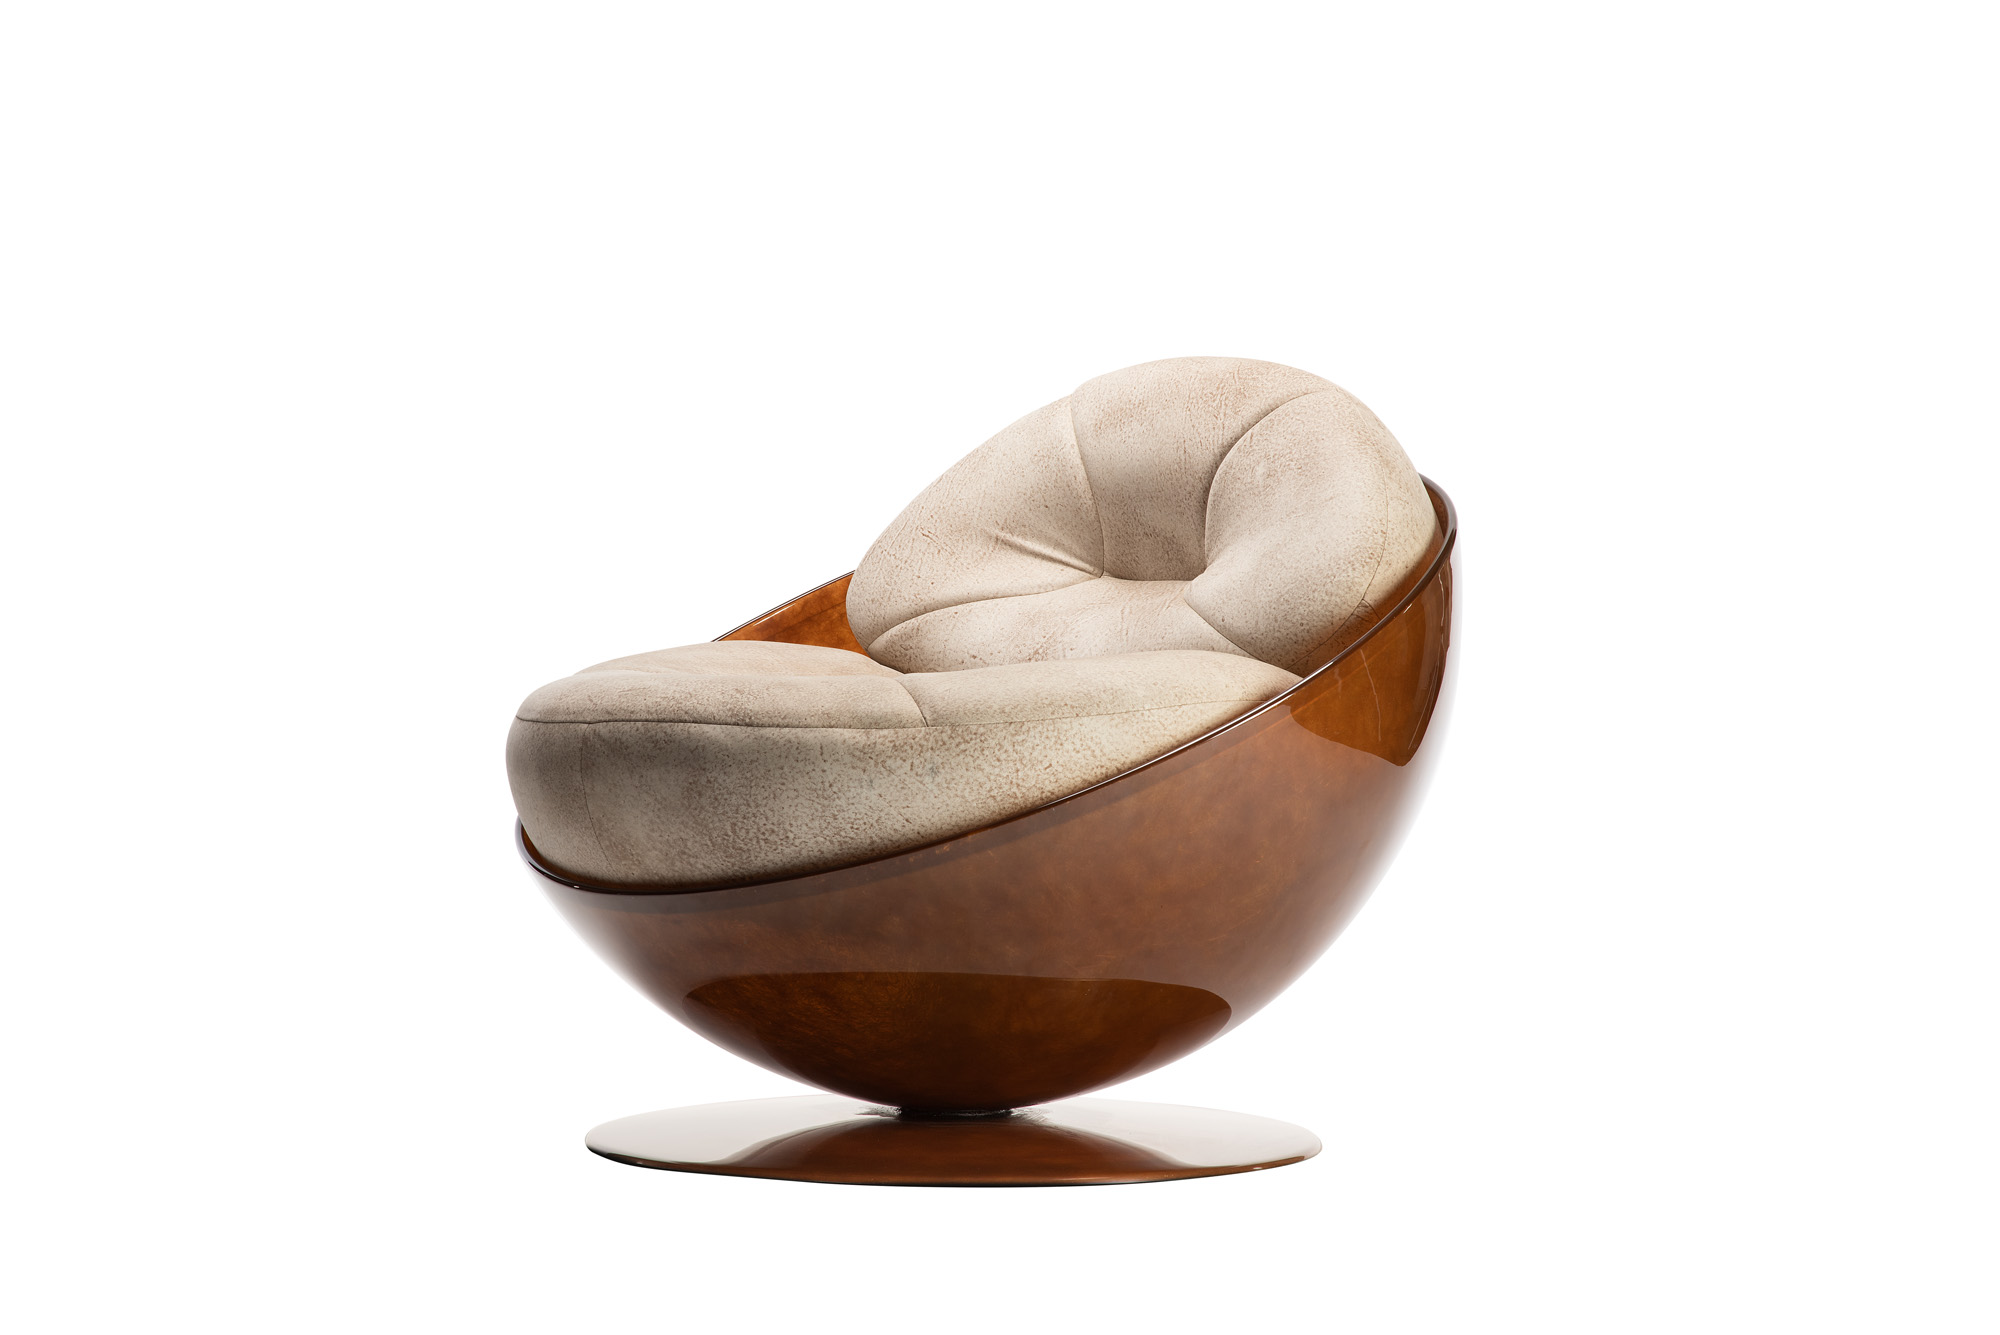 Luxury and artisinal furniture design in London: Egg chair by Espasso